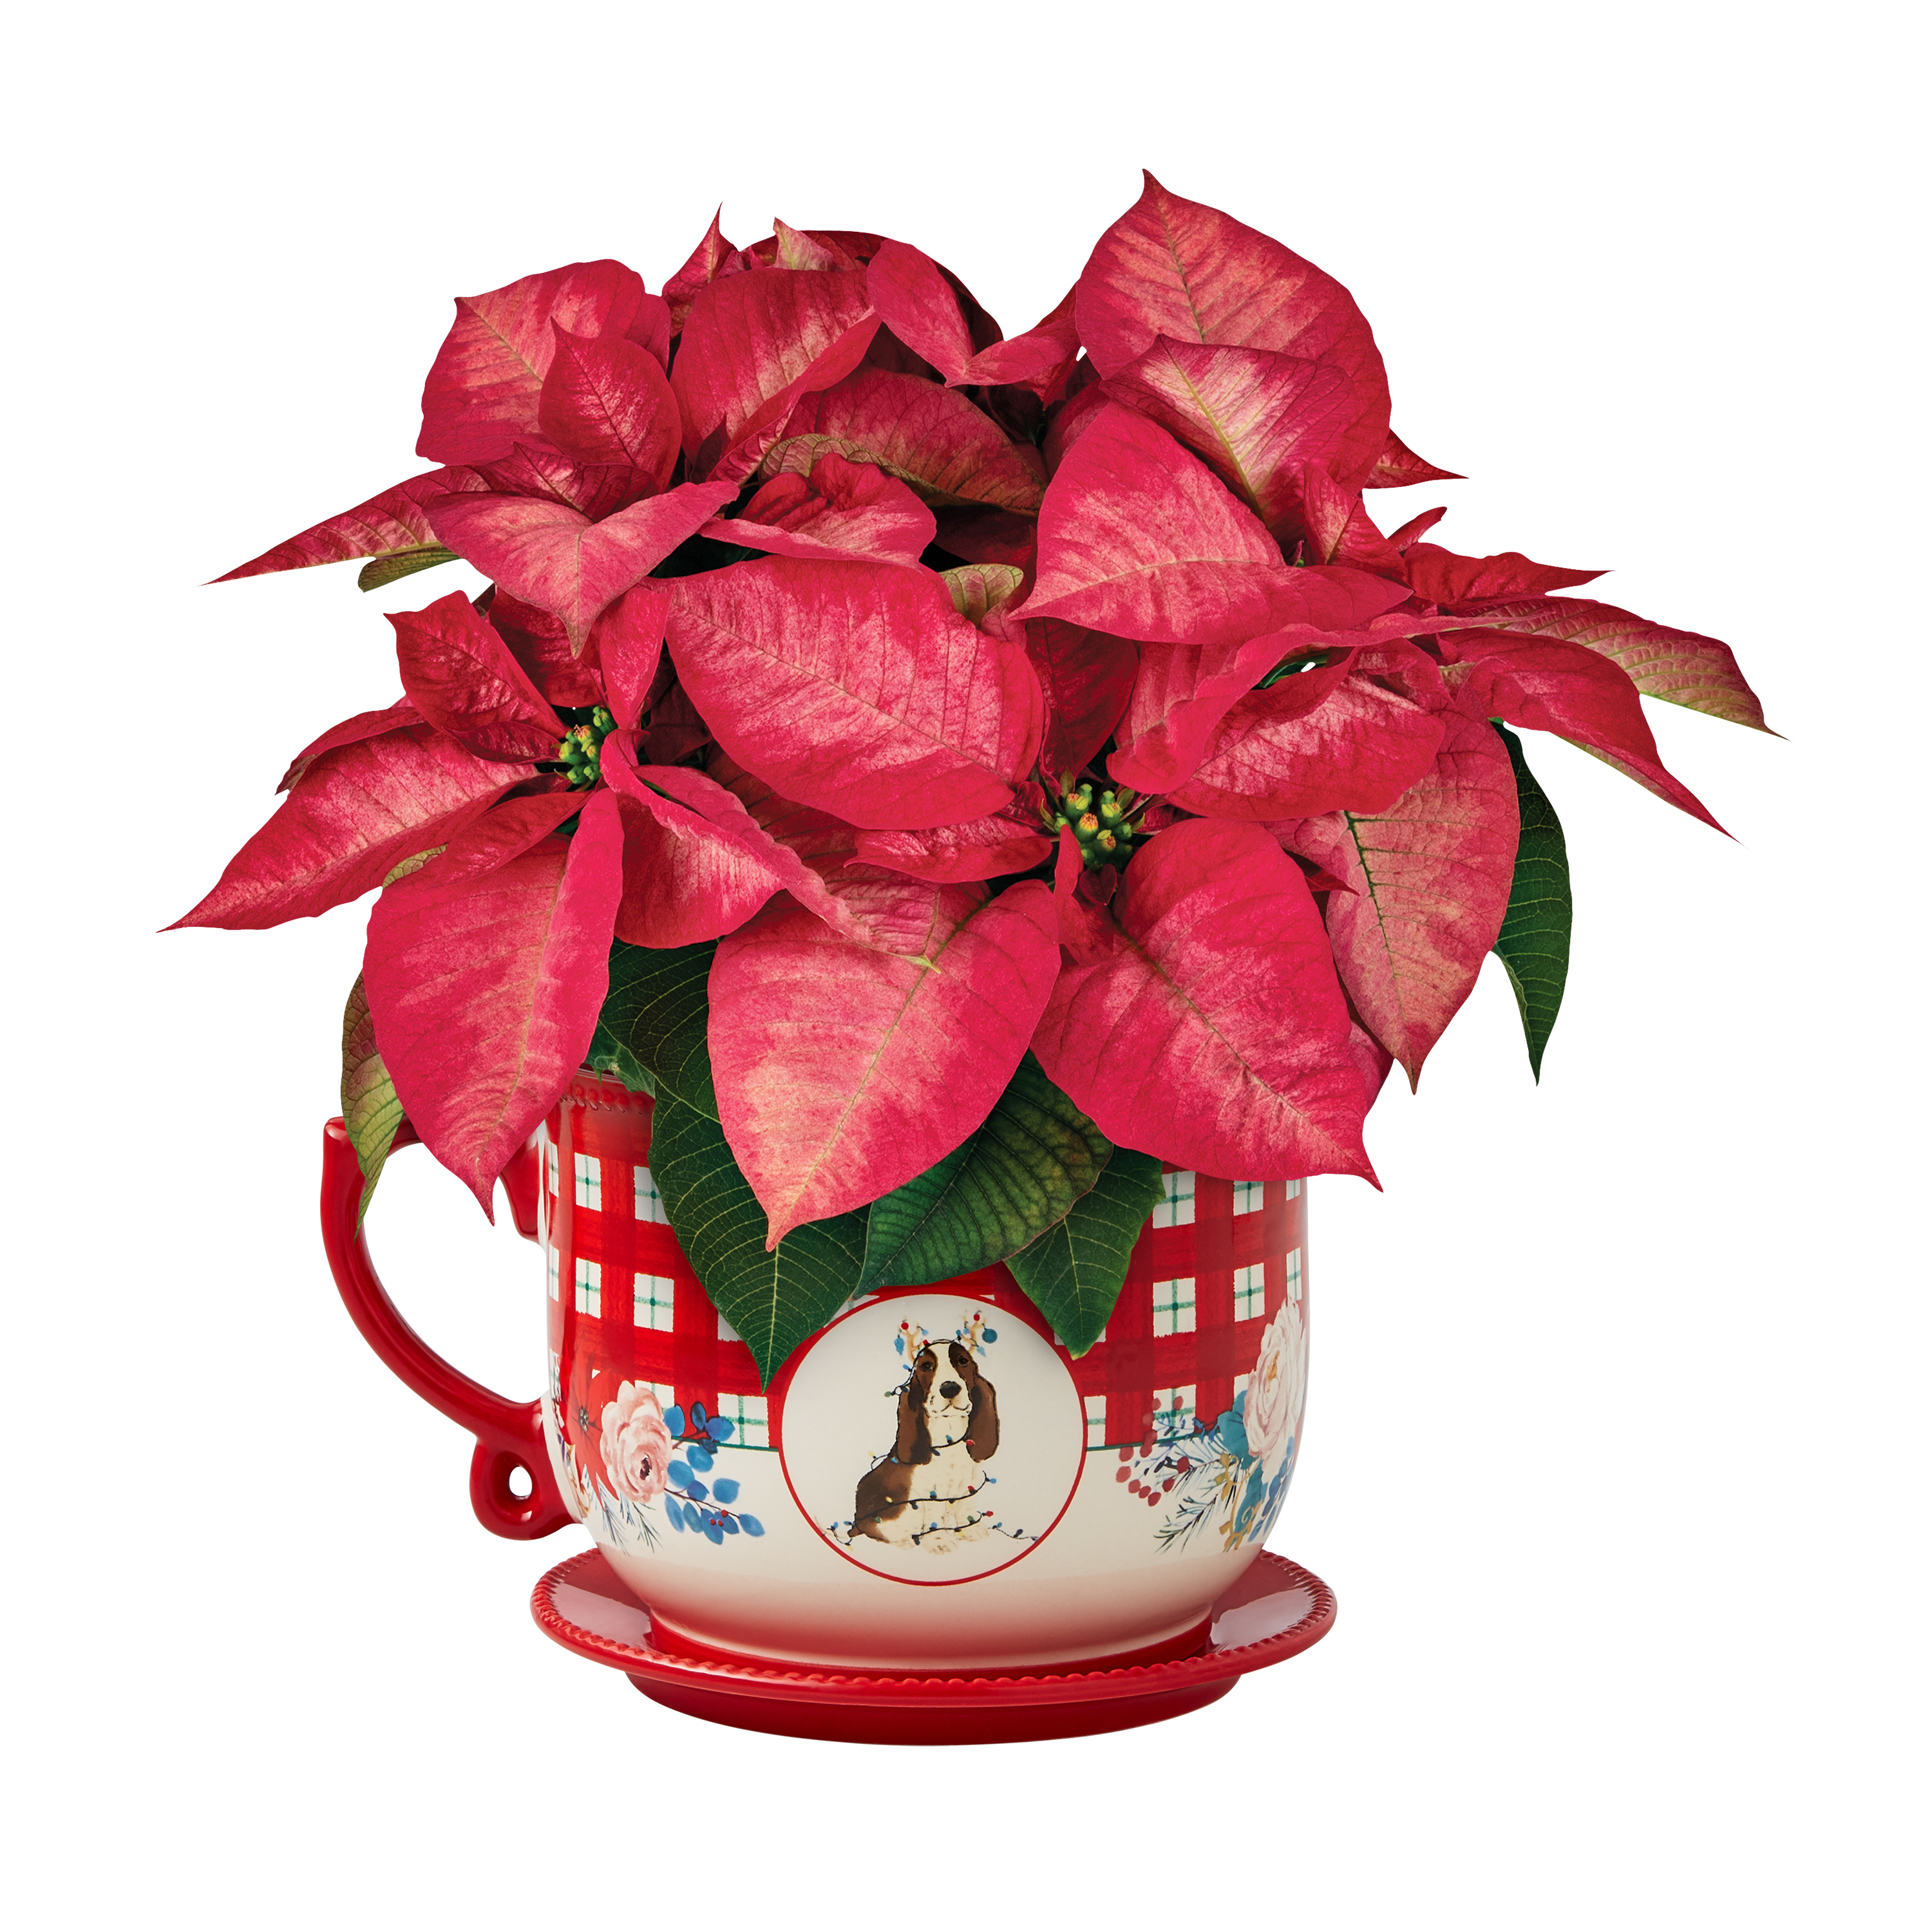 The Pioneer Woman Dark Pink Poinsettia Live Plant in 6" Mug Planter - image 1 of 9